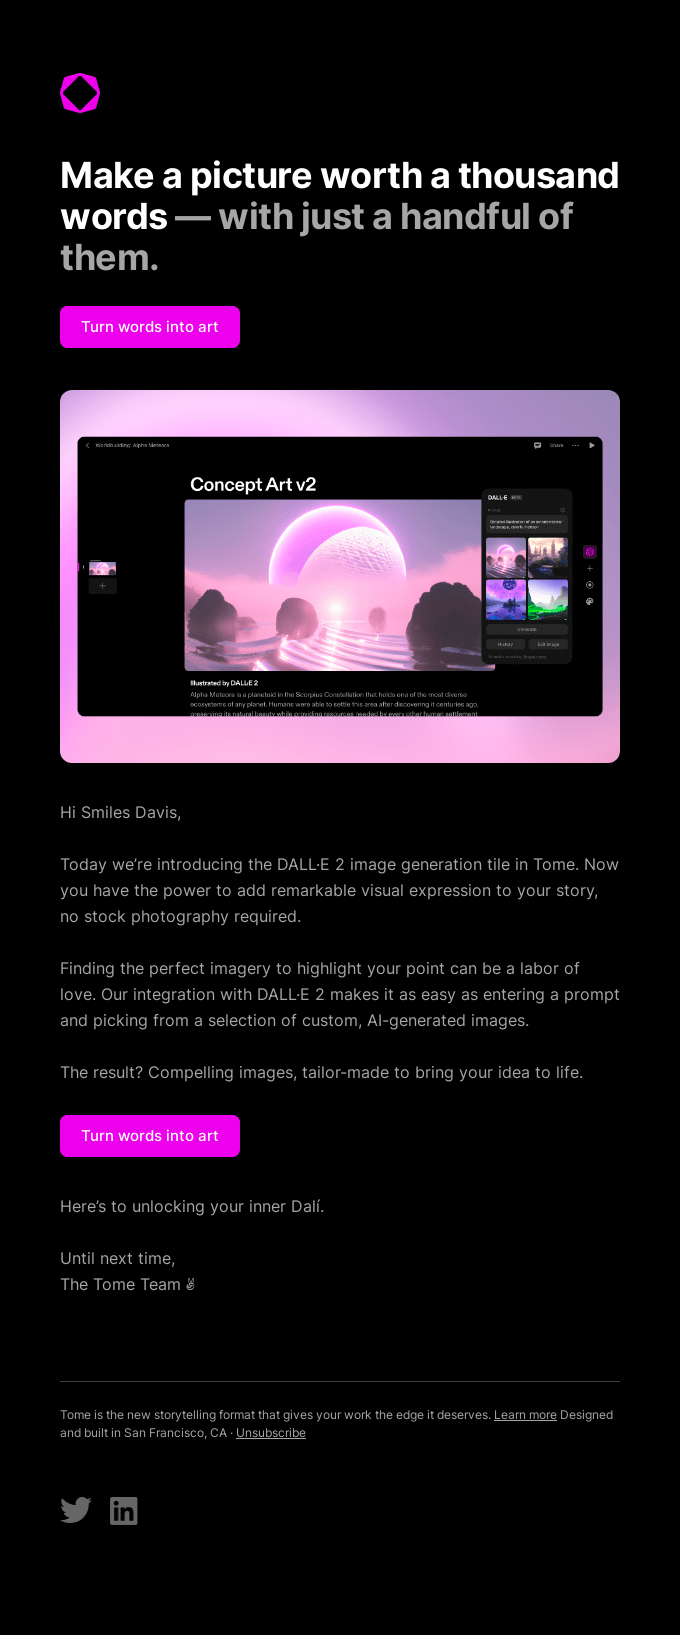 product update email by Tome